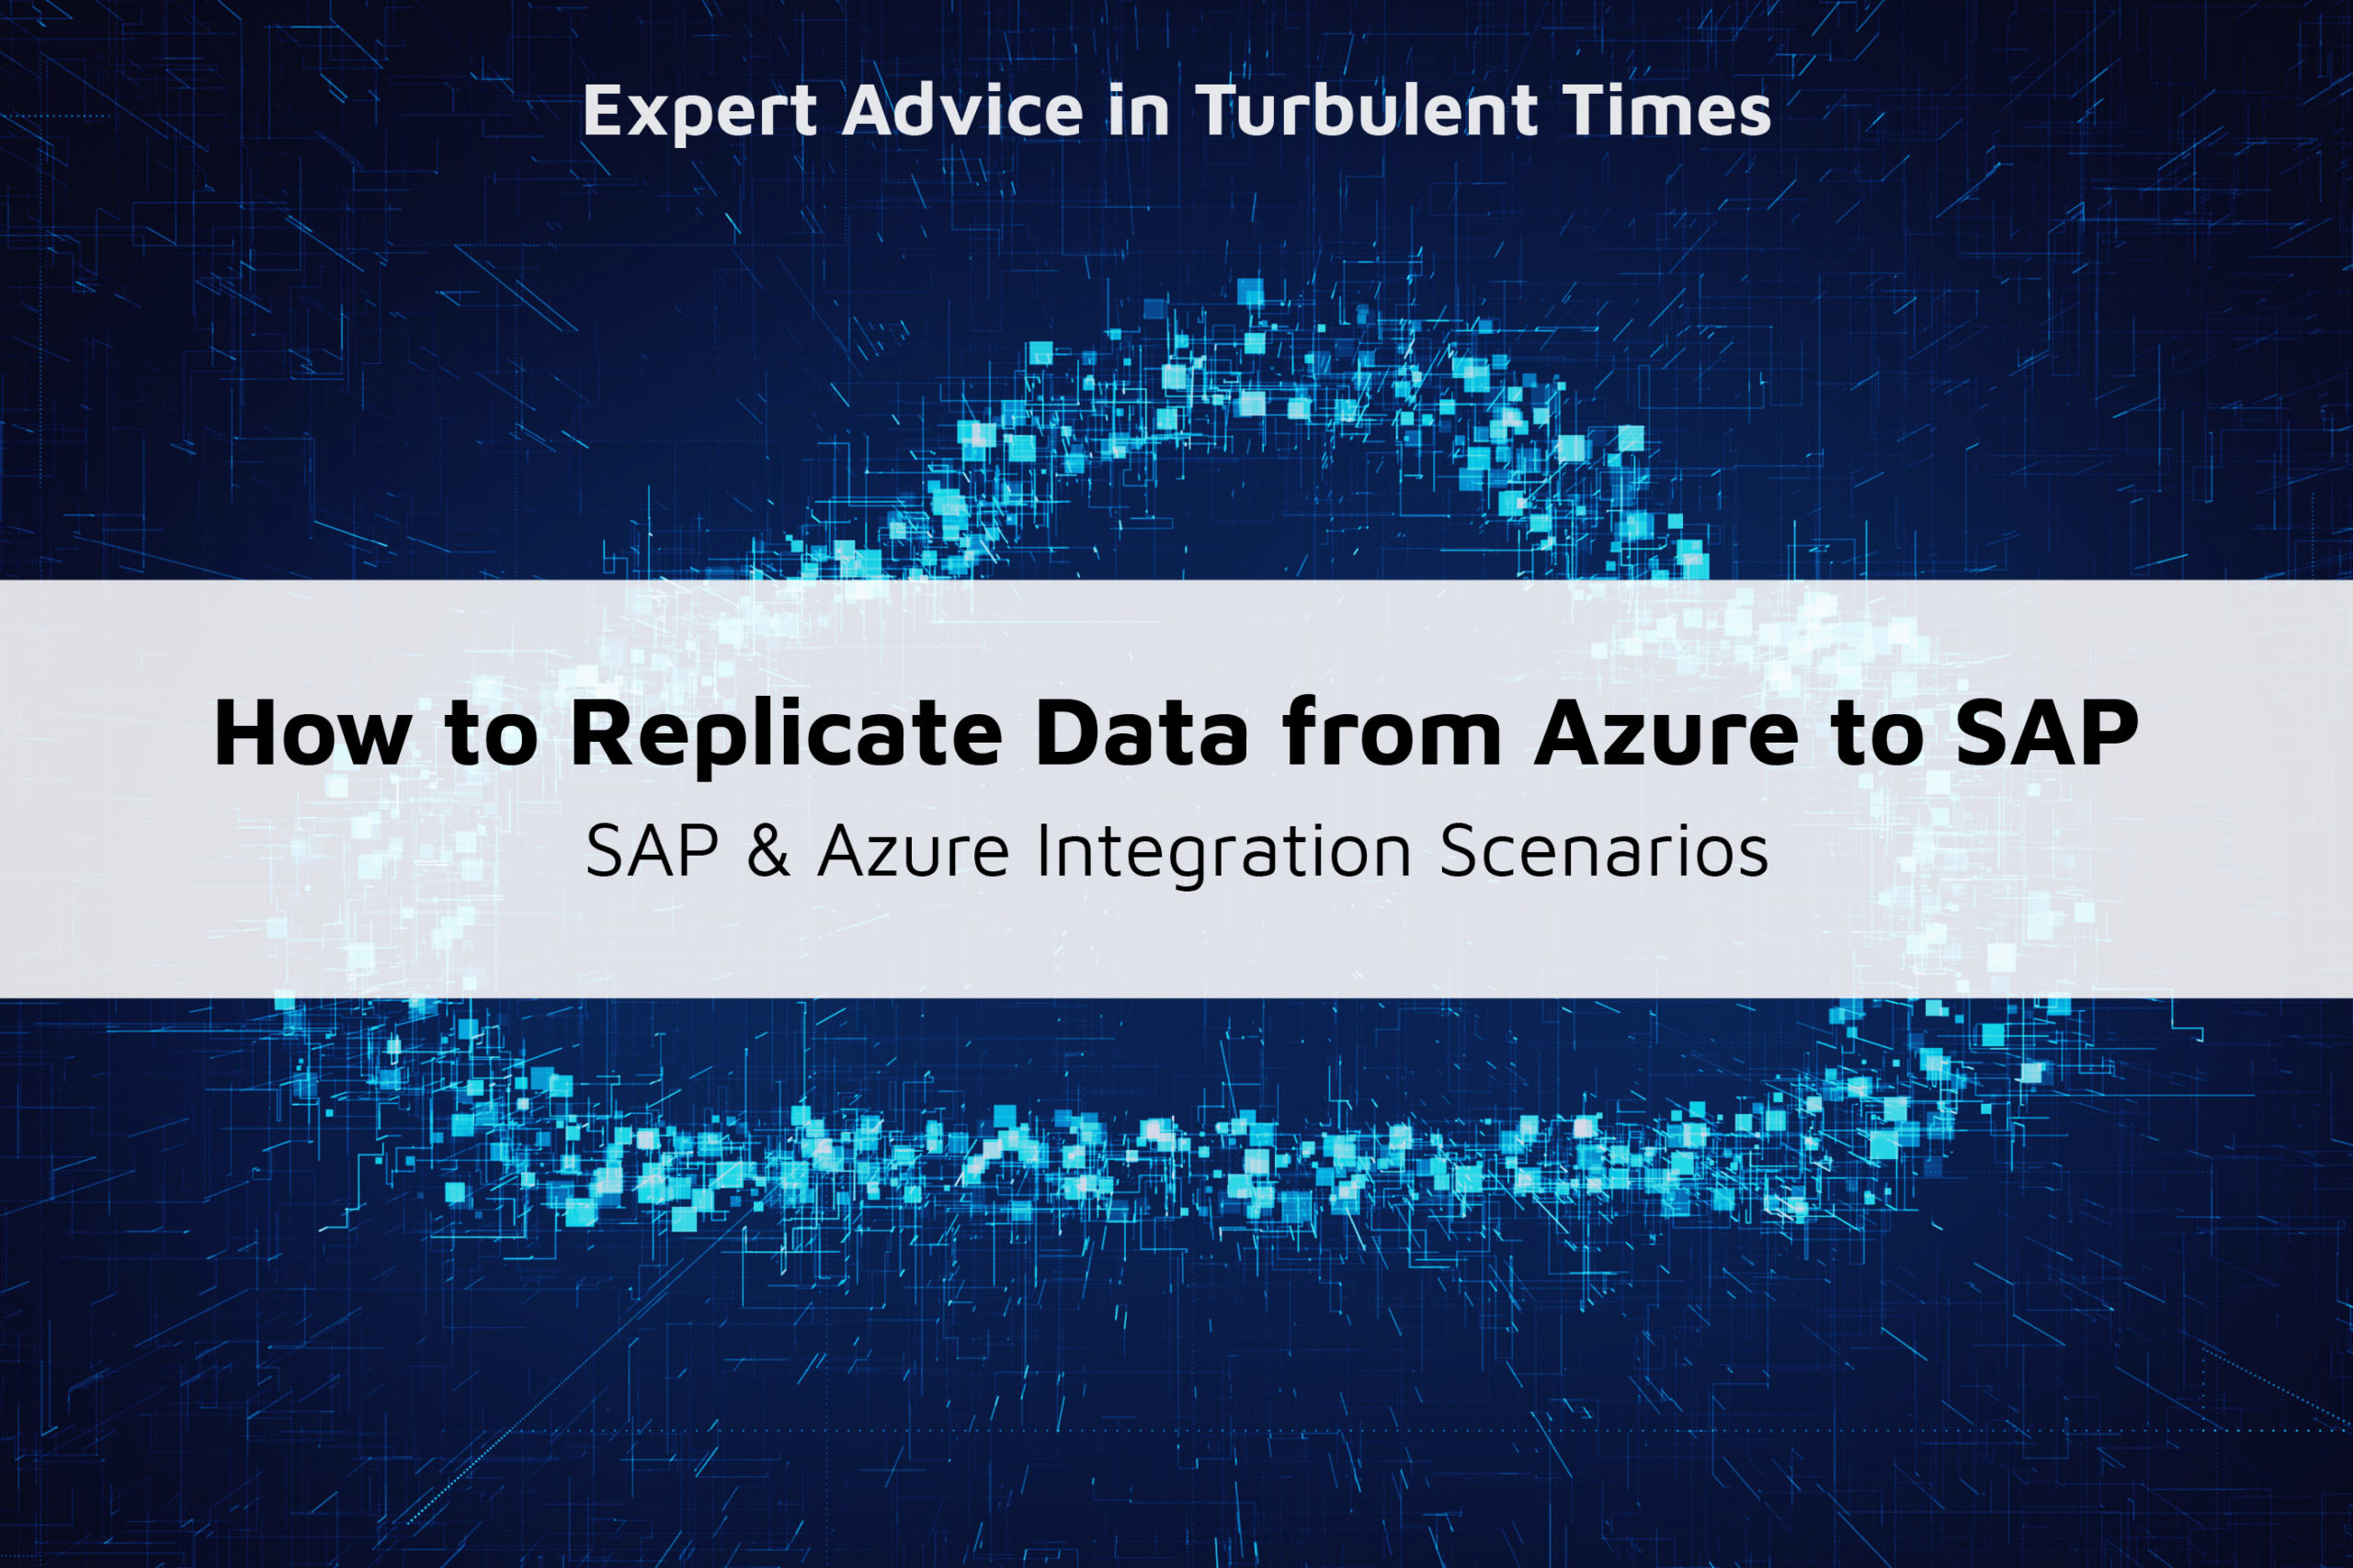 How to Replicate Data from Azure to SAP